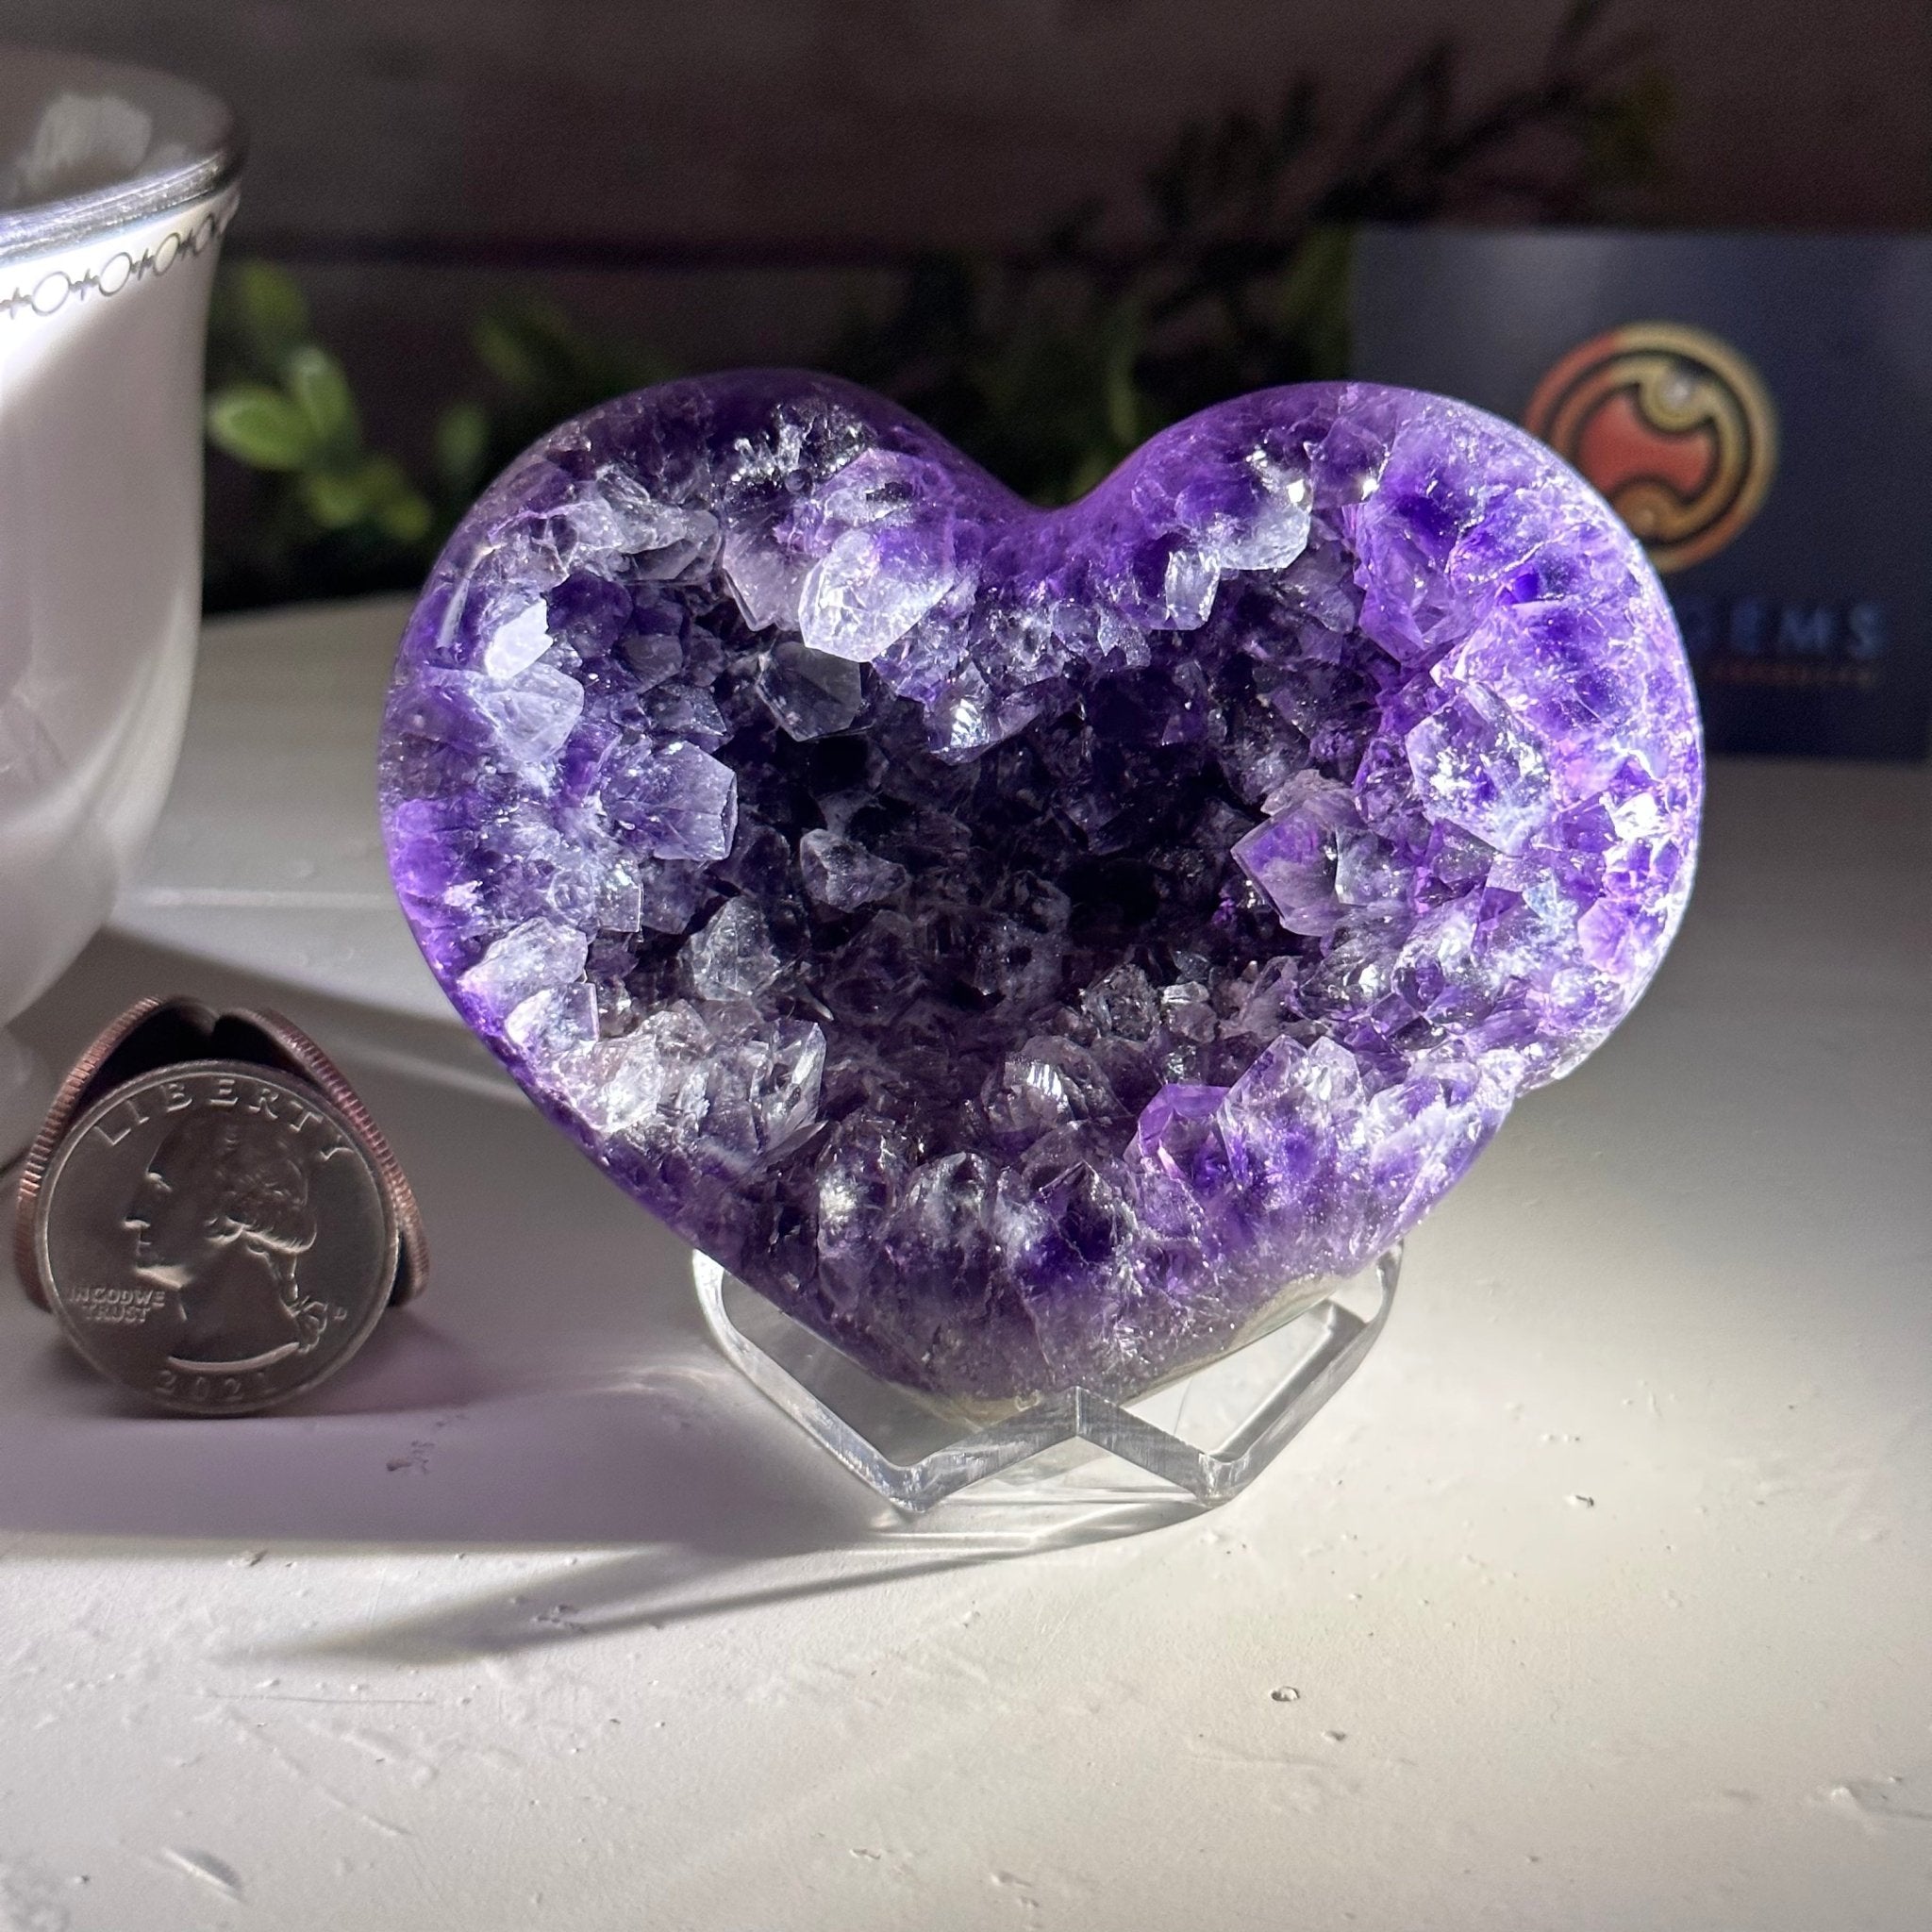 Extra Plus Quality Amethyst Heart Geode on an Acrylic Stand, 0.53 lbs & 2.5" Tall #5462-0040 by Brazil Gems - Brazil GemsBrazil GemsExtra Plus Quality Amethyst Heart Geode on an Acrylic Stand, 0.53 lbs & 2.5" Tall #5462-0040 by Brazil GemsHearts5462-0040